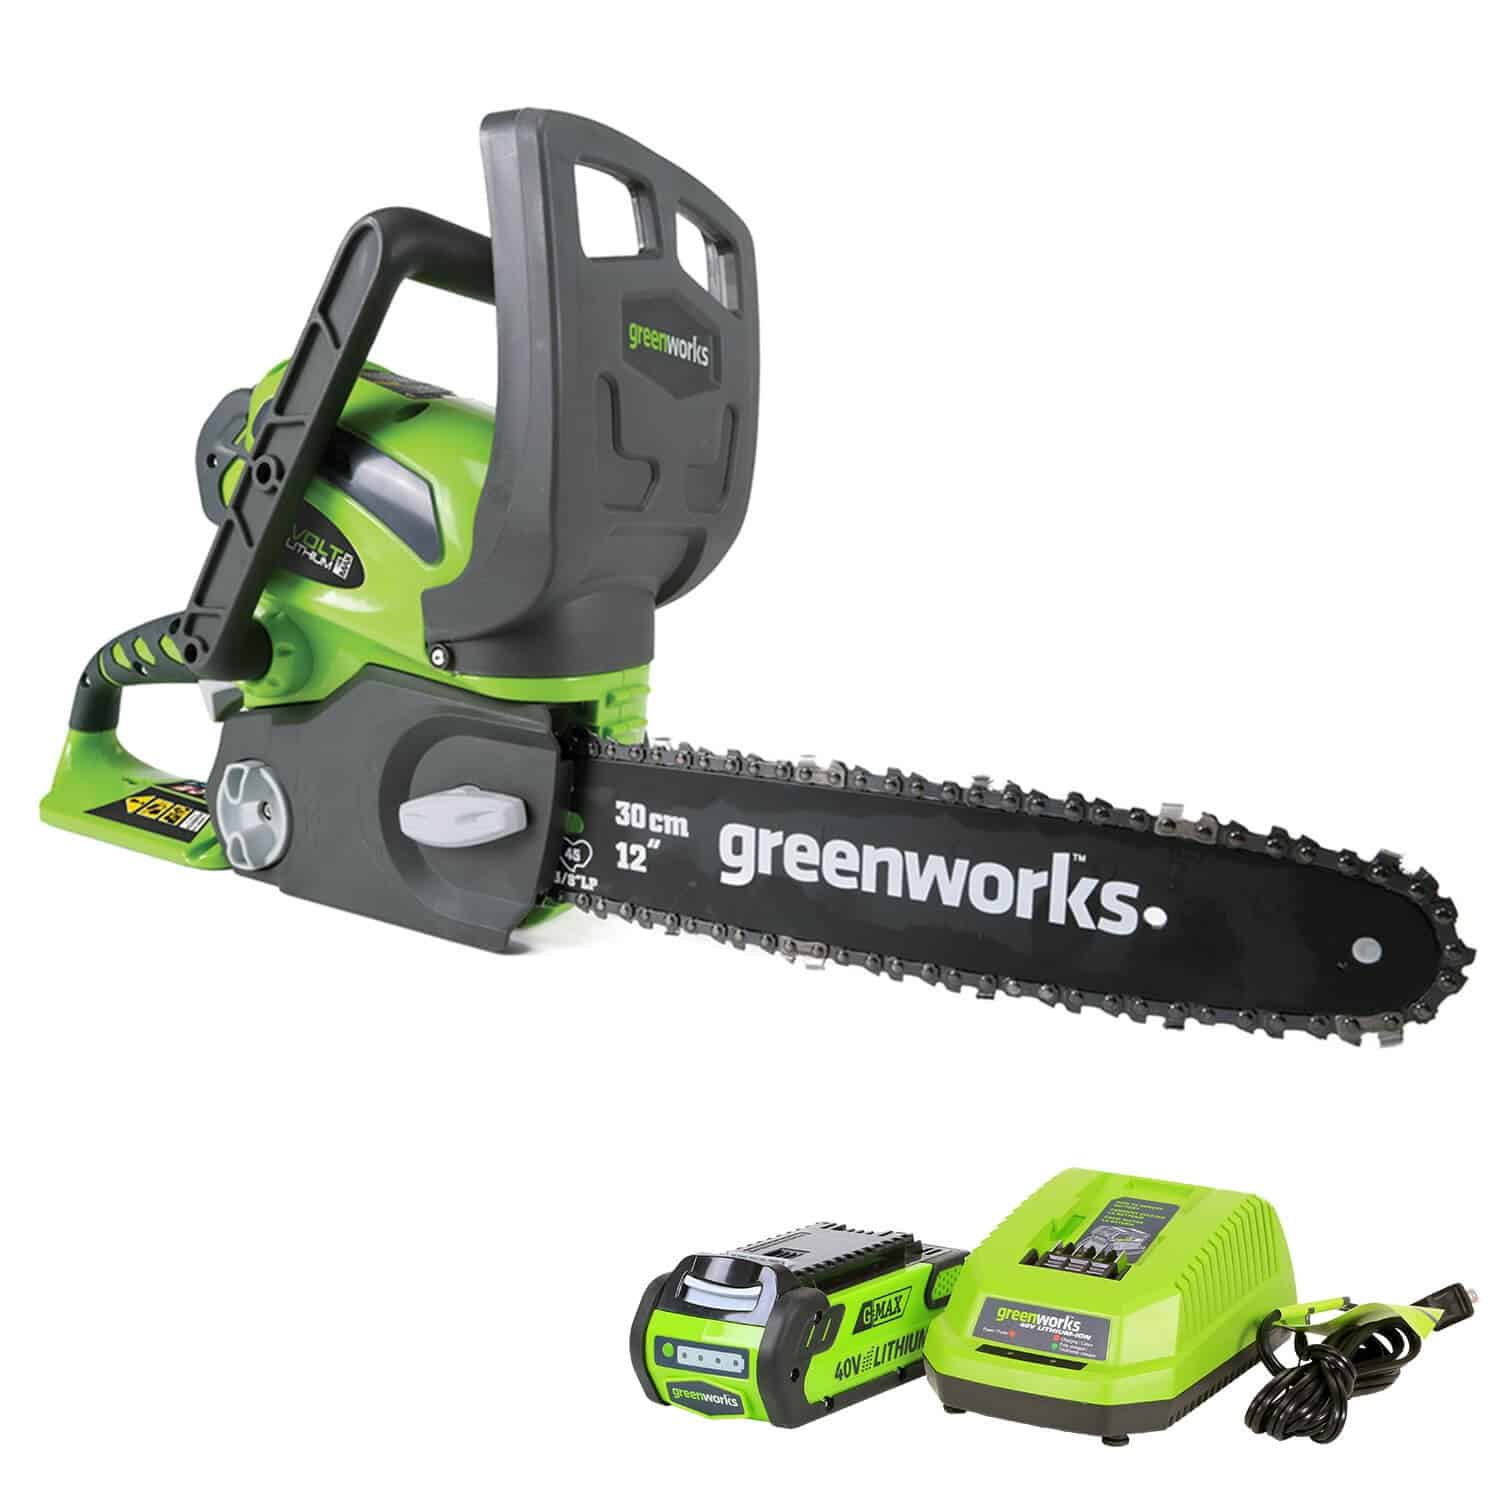 Battery powered chainsaw